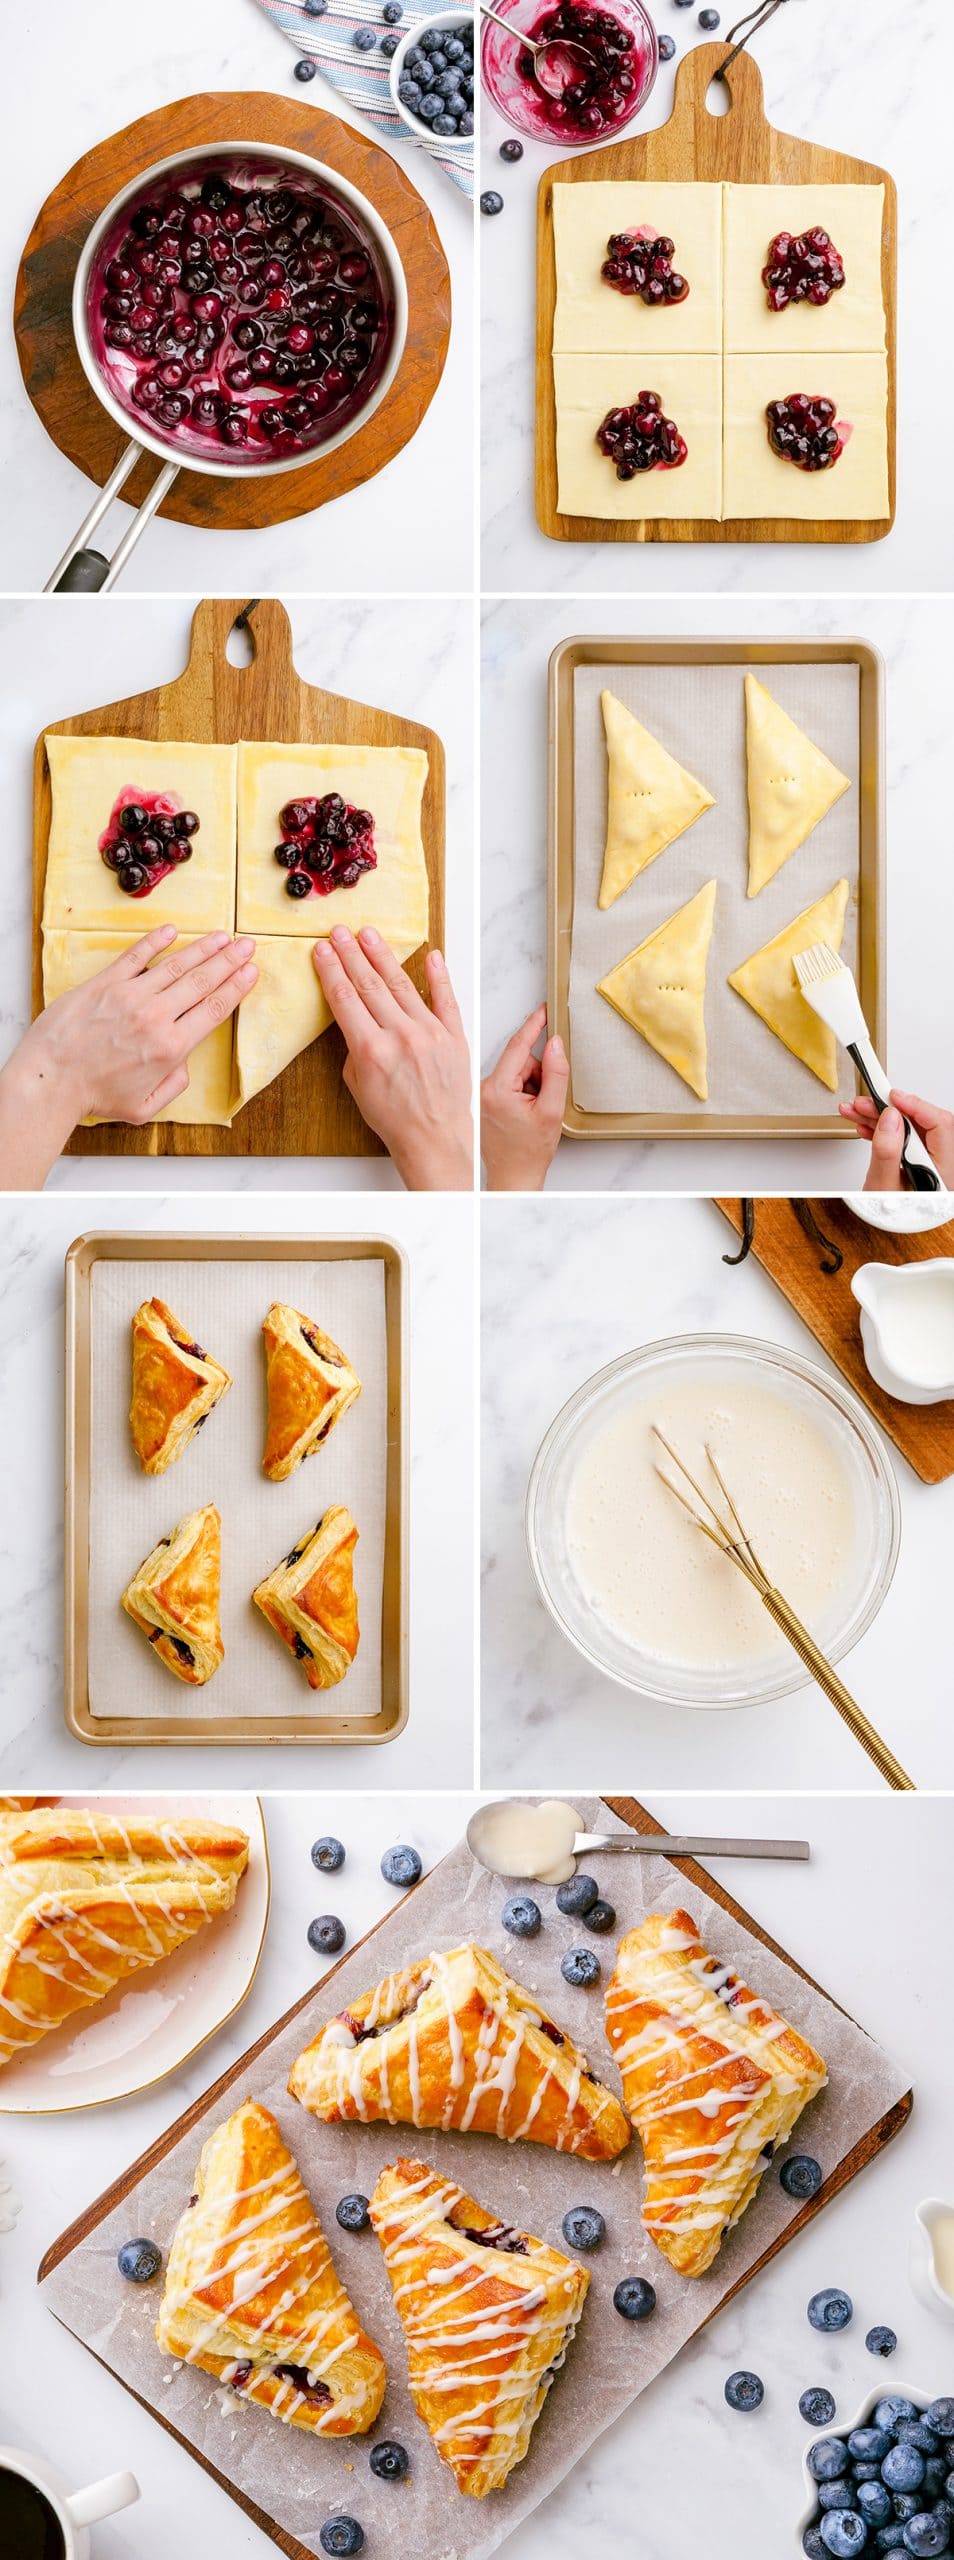 A collage of step by step photos showing how to make blueberry turnovers.